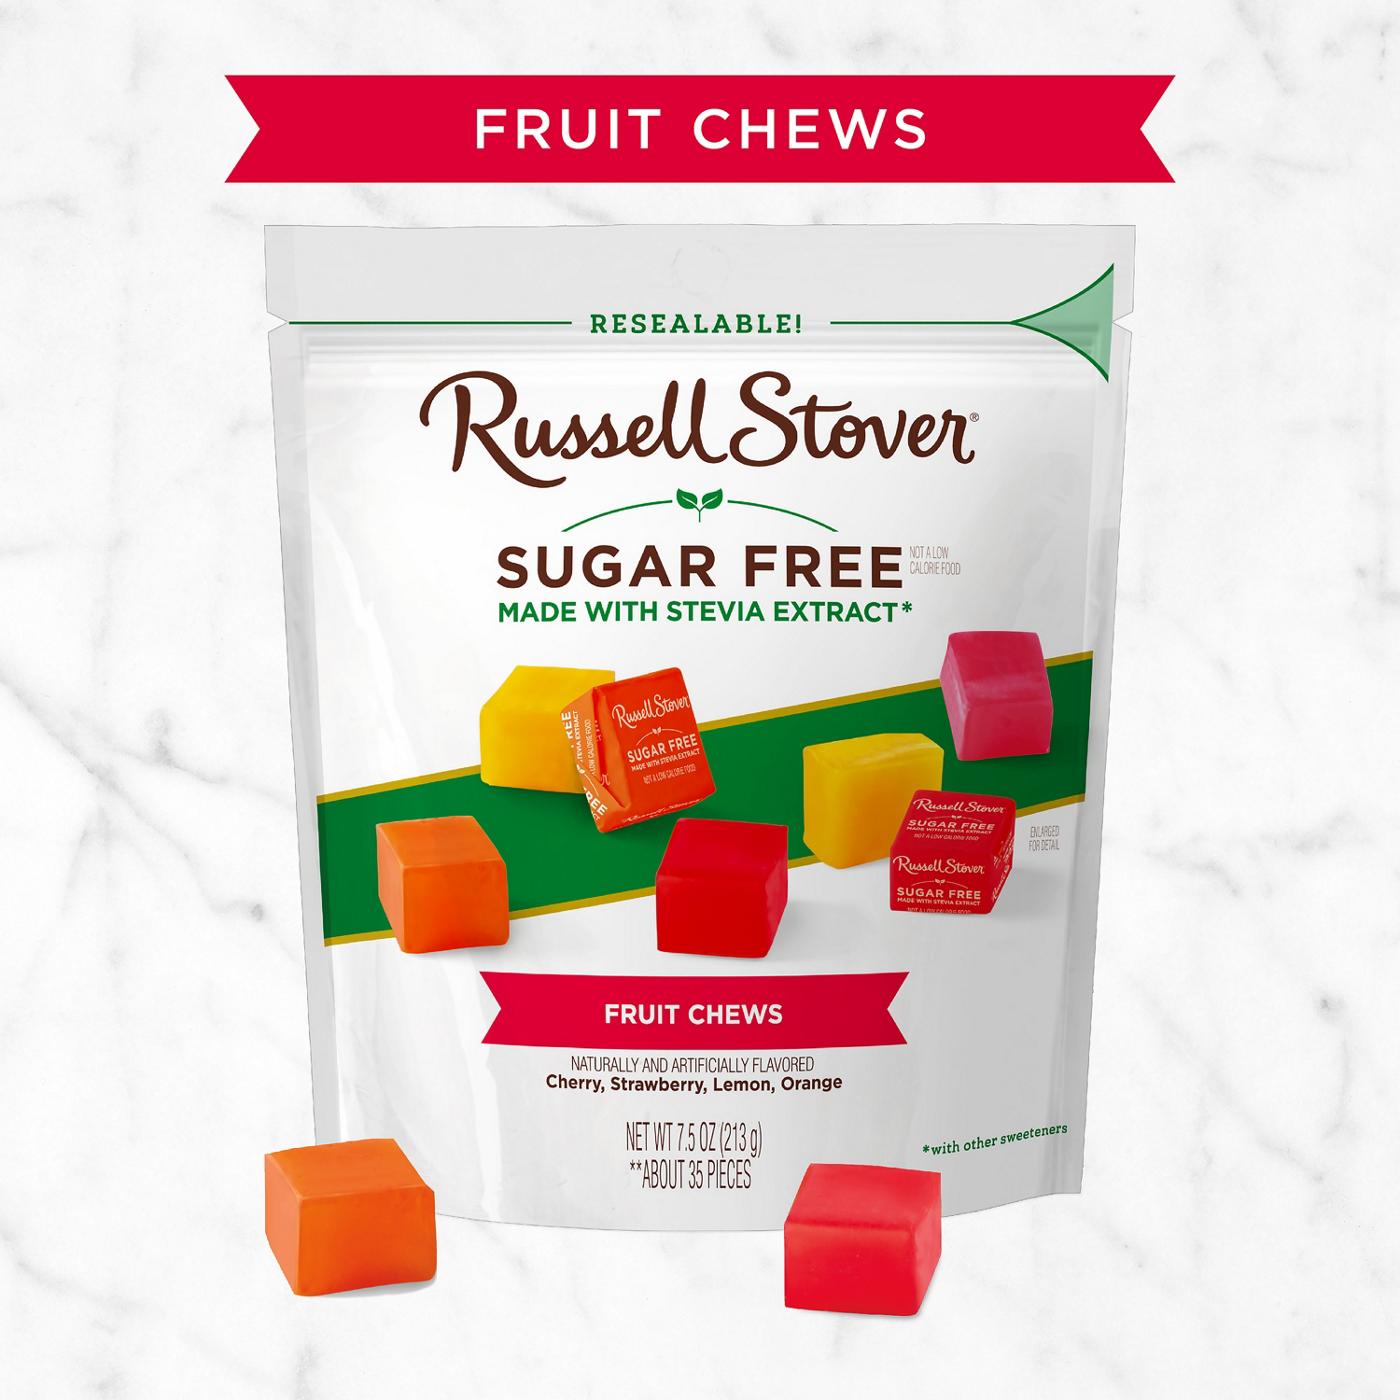 Russell Stover Sugar Free Fruit Chews; image 4 of 6